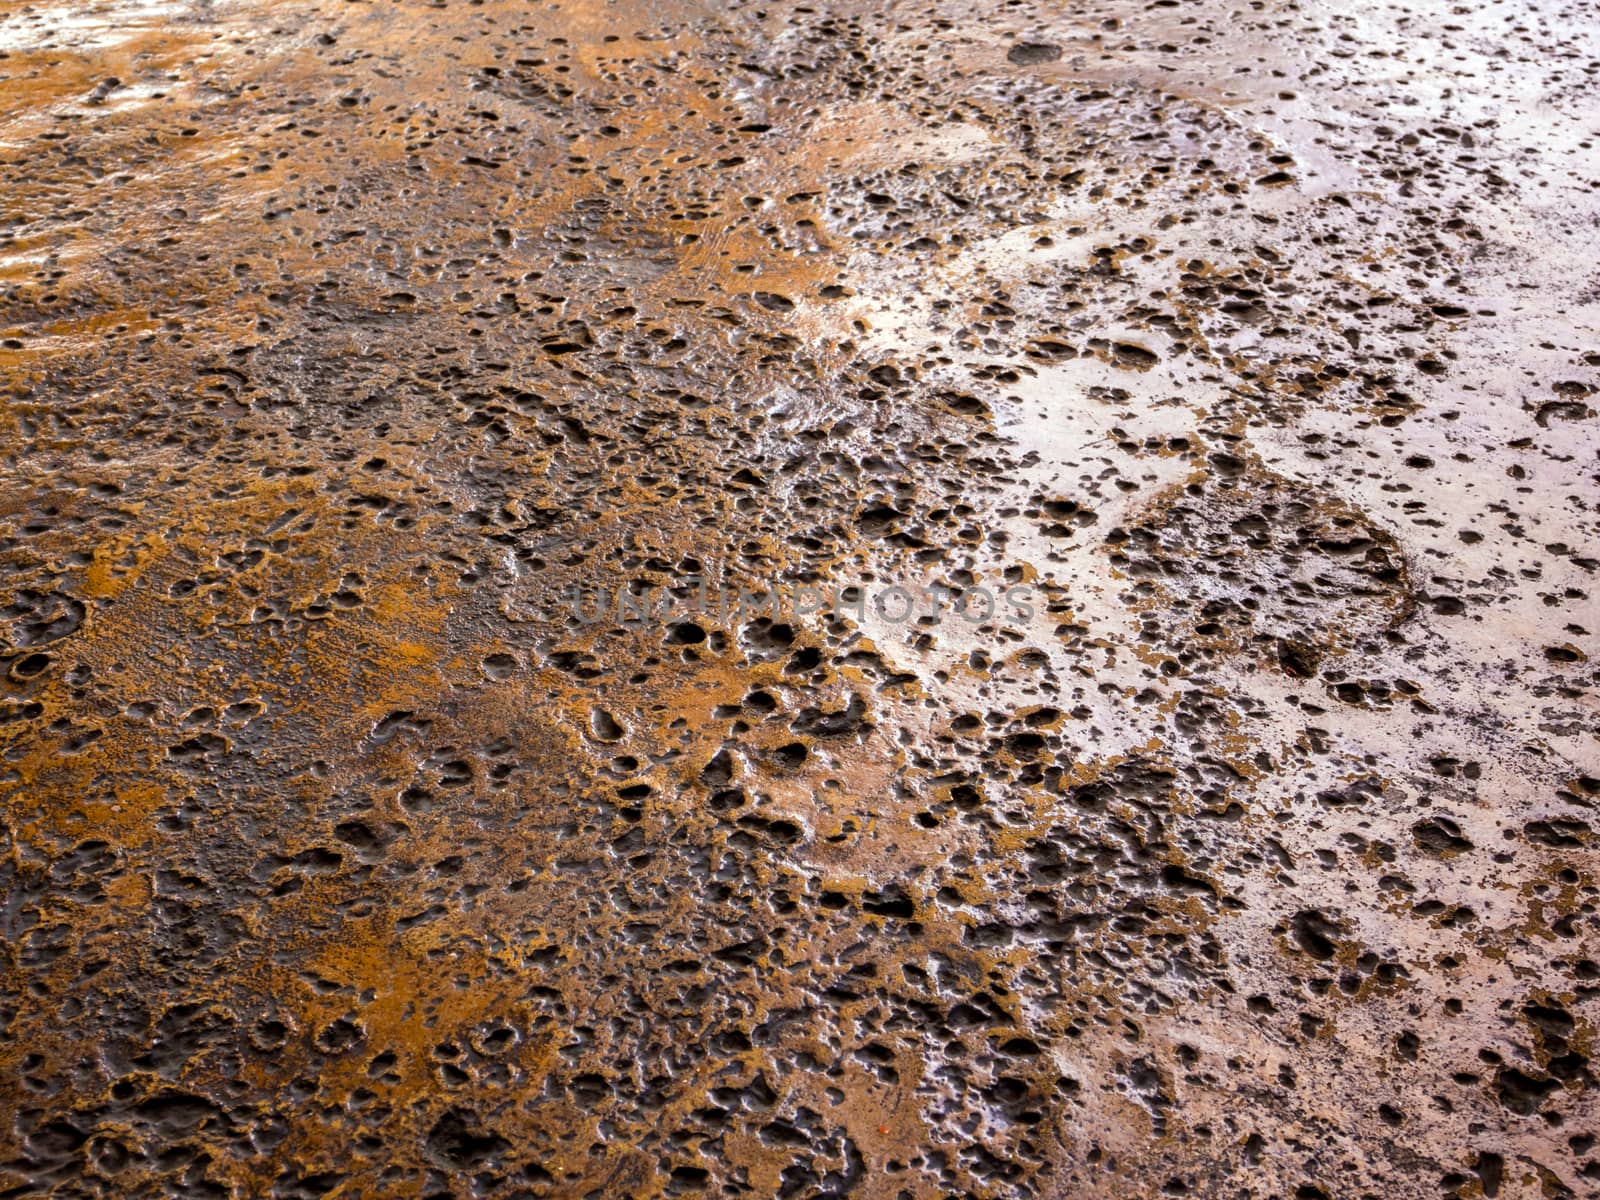 Many rugged holes on the rusty color concrete floor